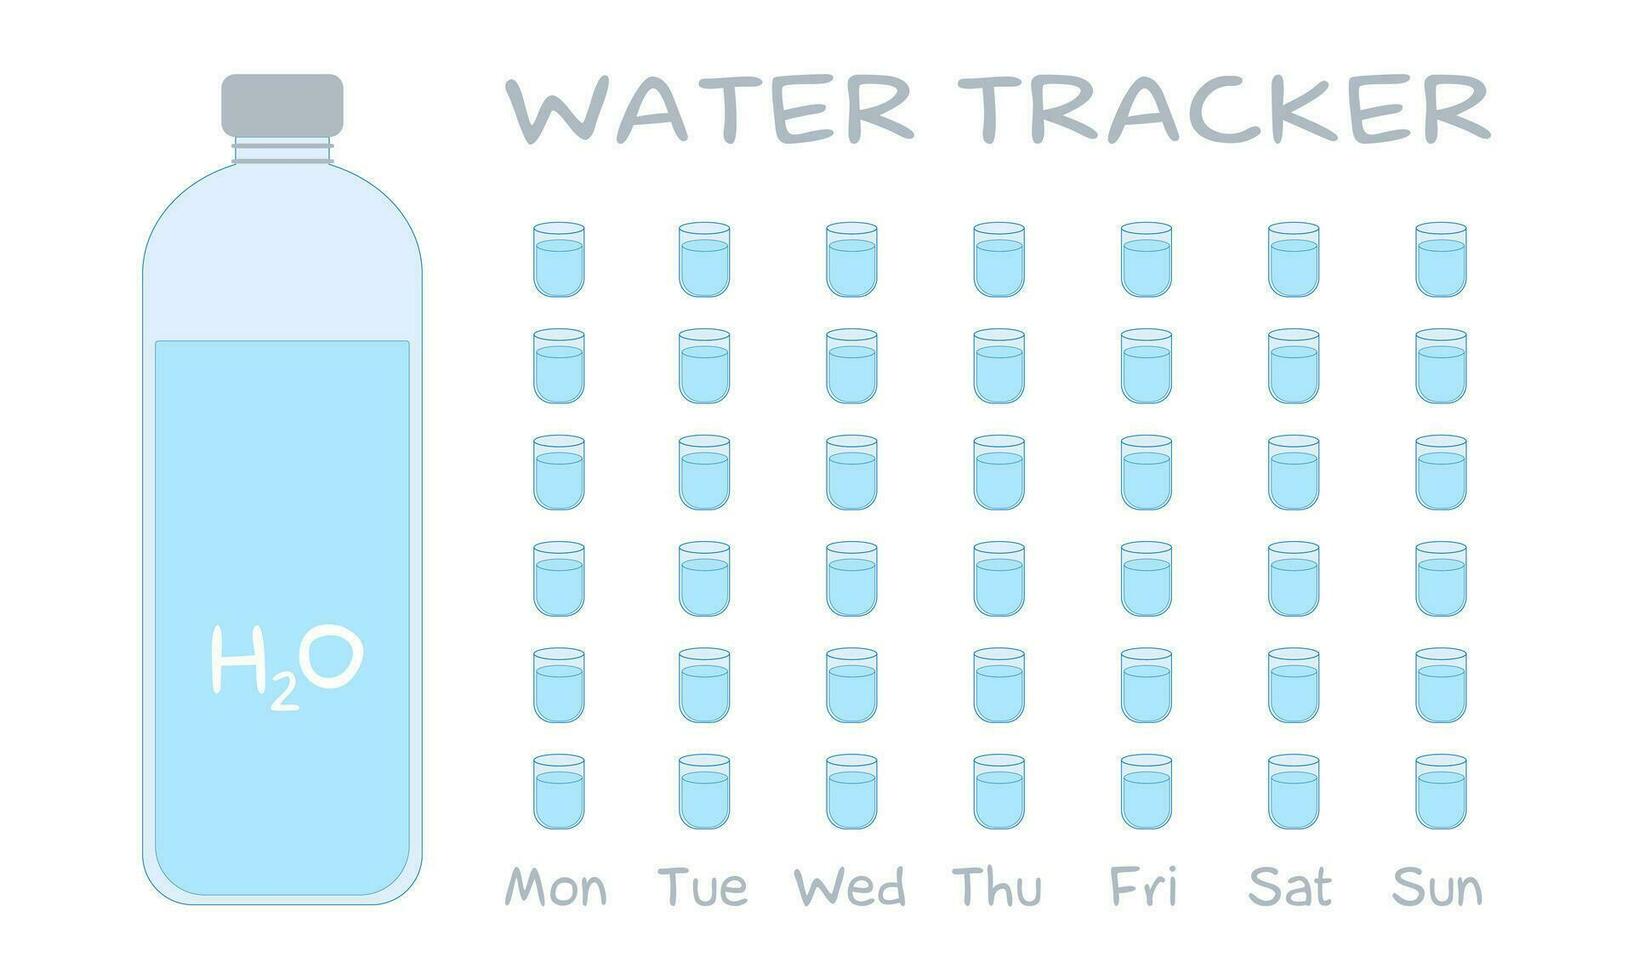 https://static.vecteezy.com/system/resources/previews/024/749/740/non_2x/water-tracker-water-balance-calendar-water-weekly-tracker-from-monday-to-sunday-hydration-challenge-flat-illustration-on-a-white-background-drinking-water-checklist-with-bottle-and-cups-vector.jpg